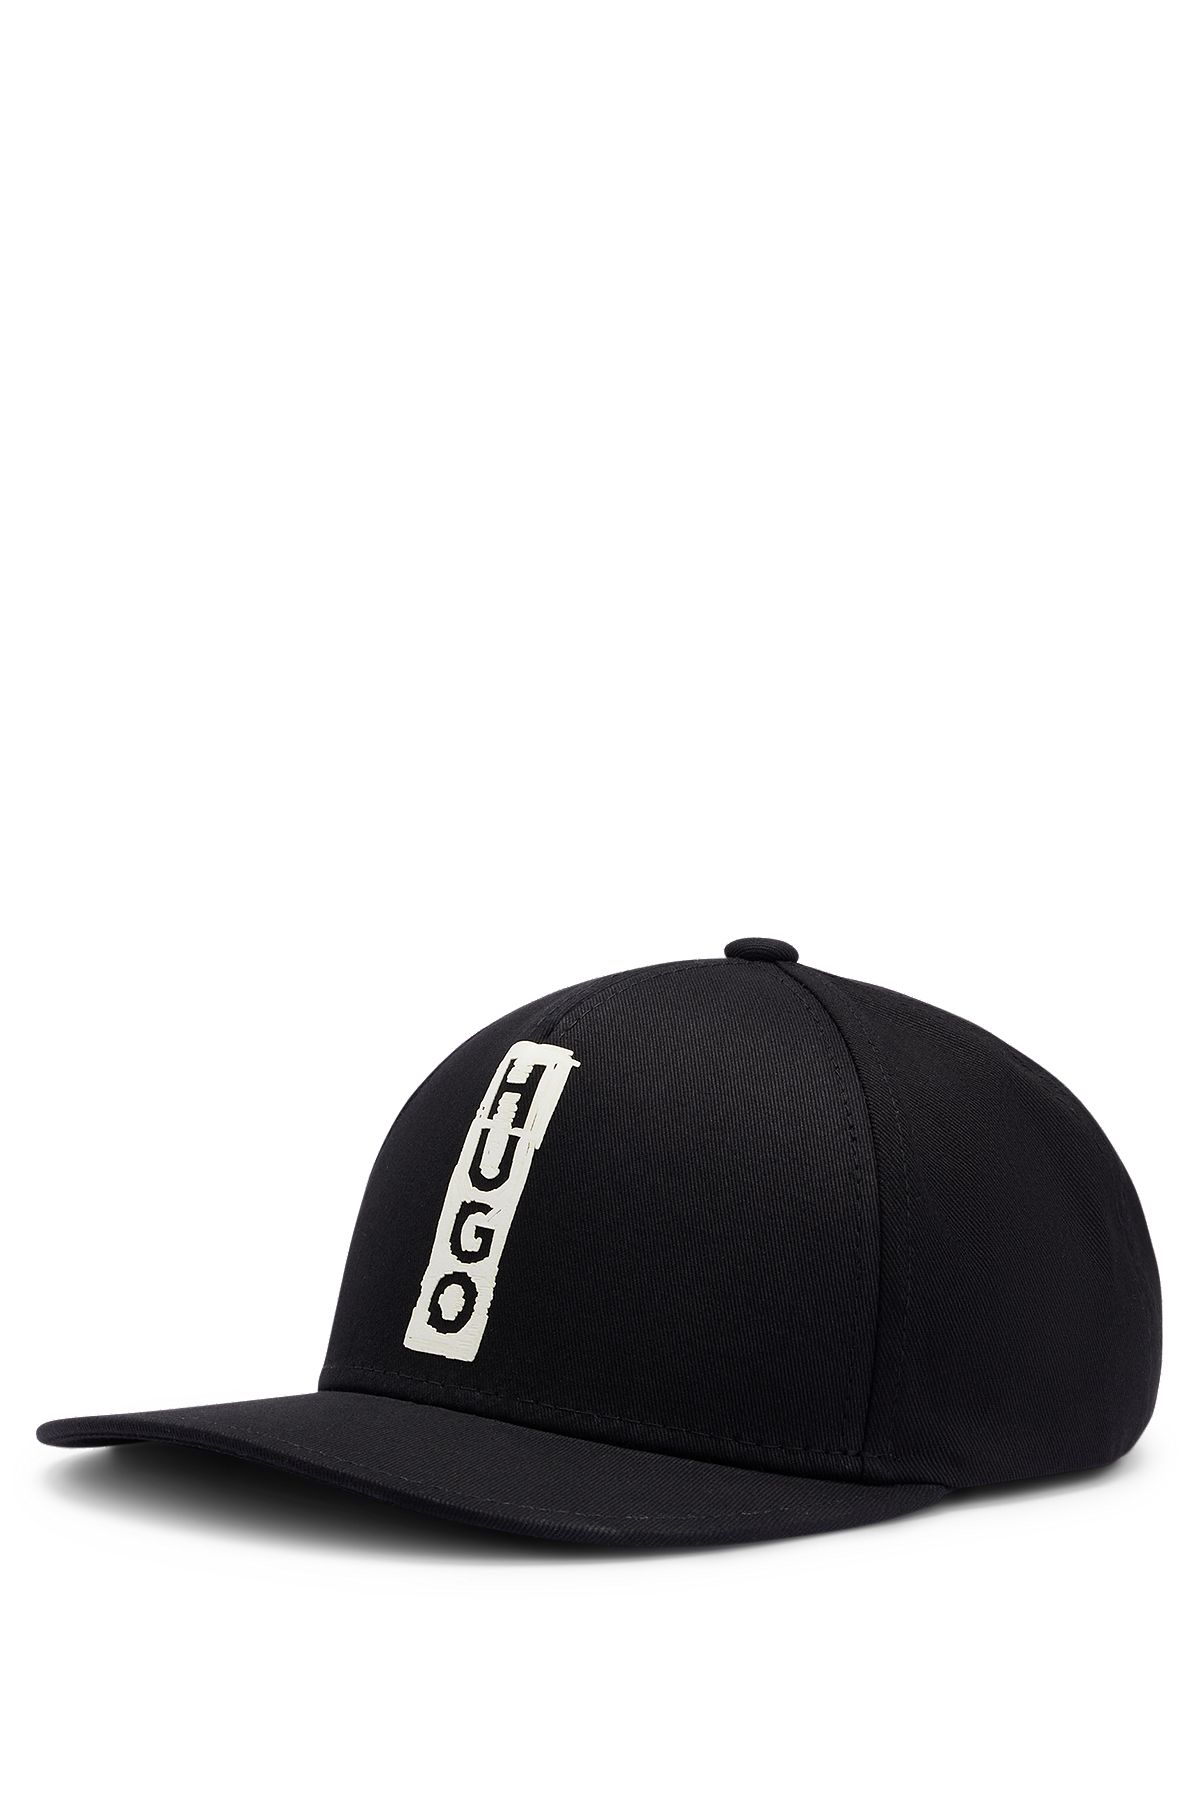 Cotton-twill cap with marker-style logo, Black